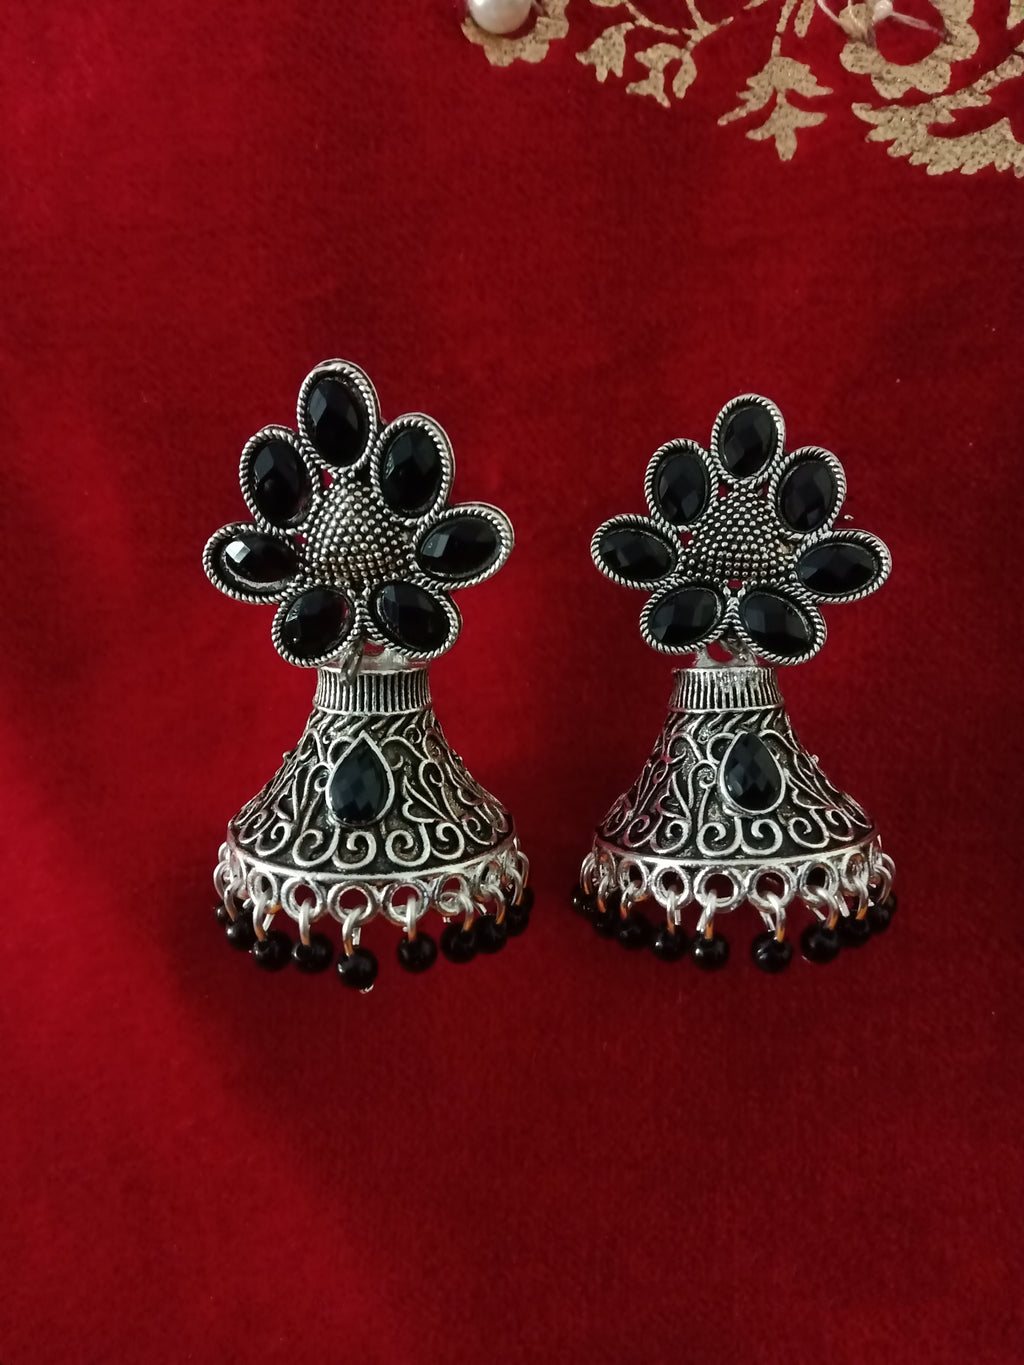 E0619_Lovely German Silver oxidized crafted jumkas with flower design with a touch of black stones & bead drops(ear drop hangings).